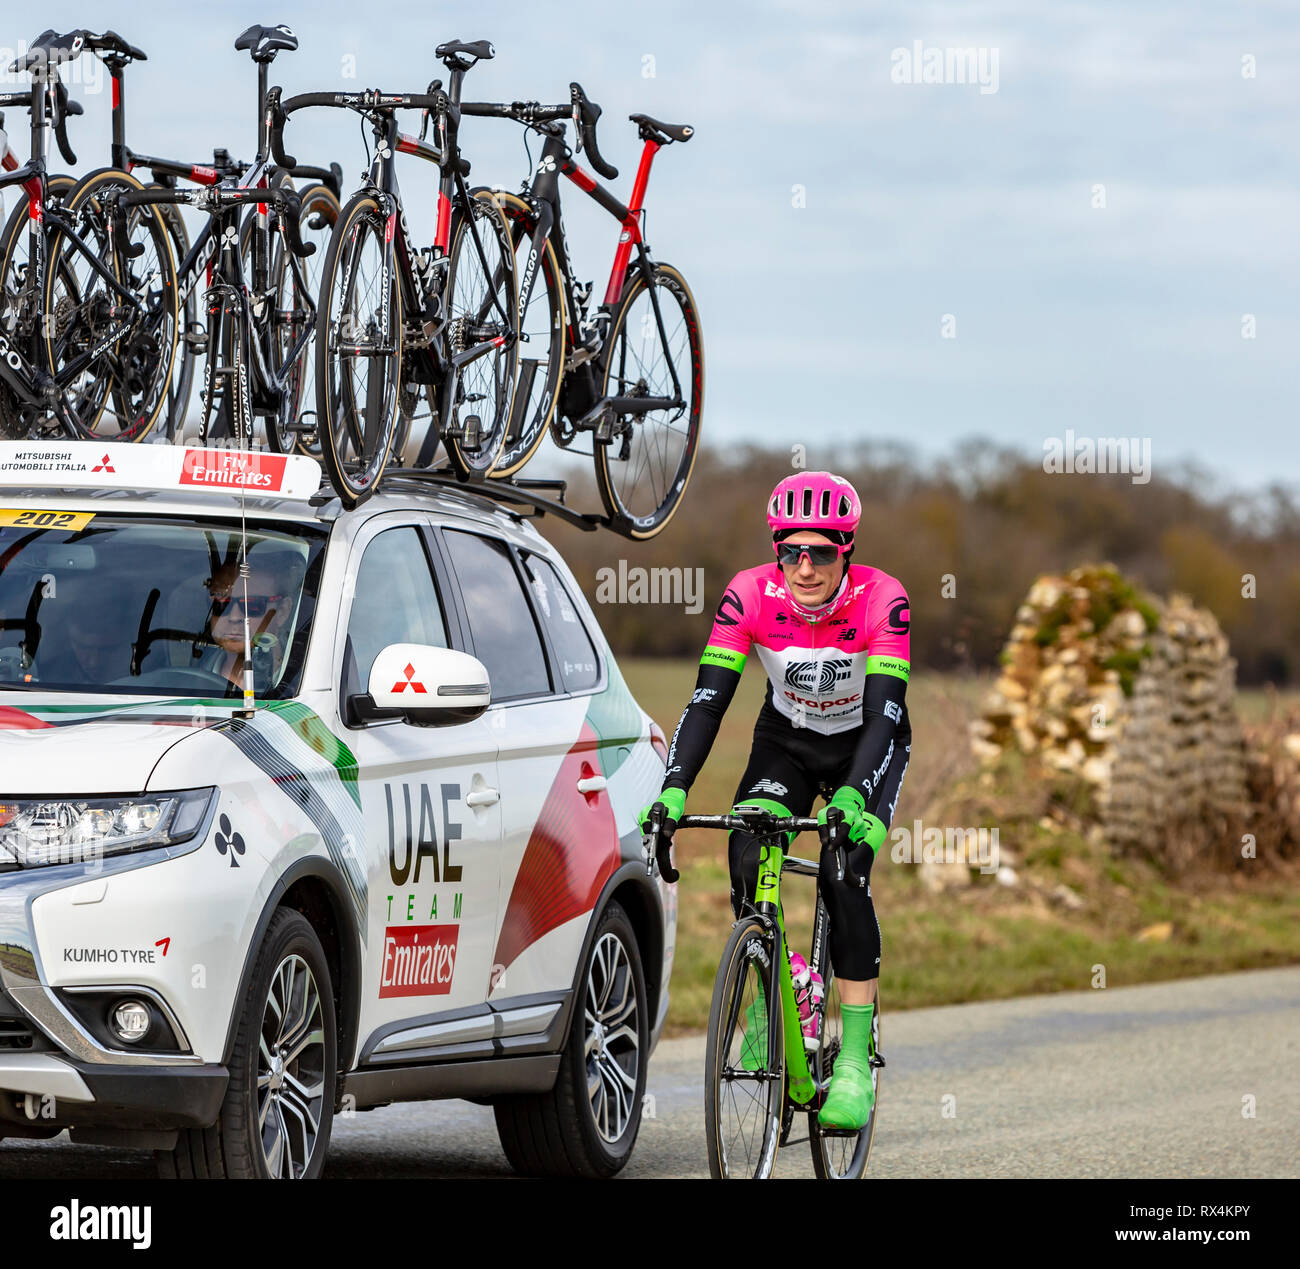 Fains-la-Folie, France - March 5, 2018: The French cyclist Pierre Rolland of EF Education First-Drapac Team riding on a country road during the stage  Stock Photo